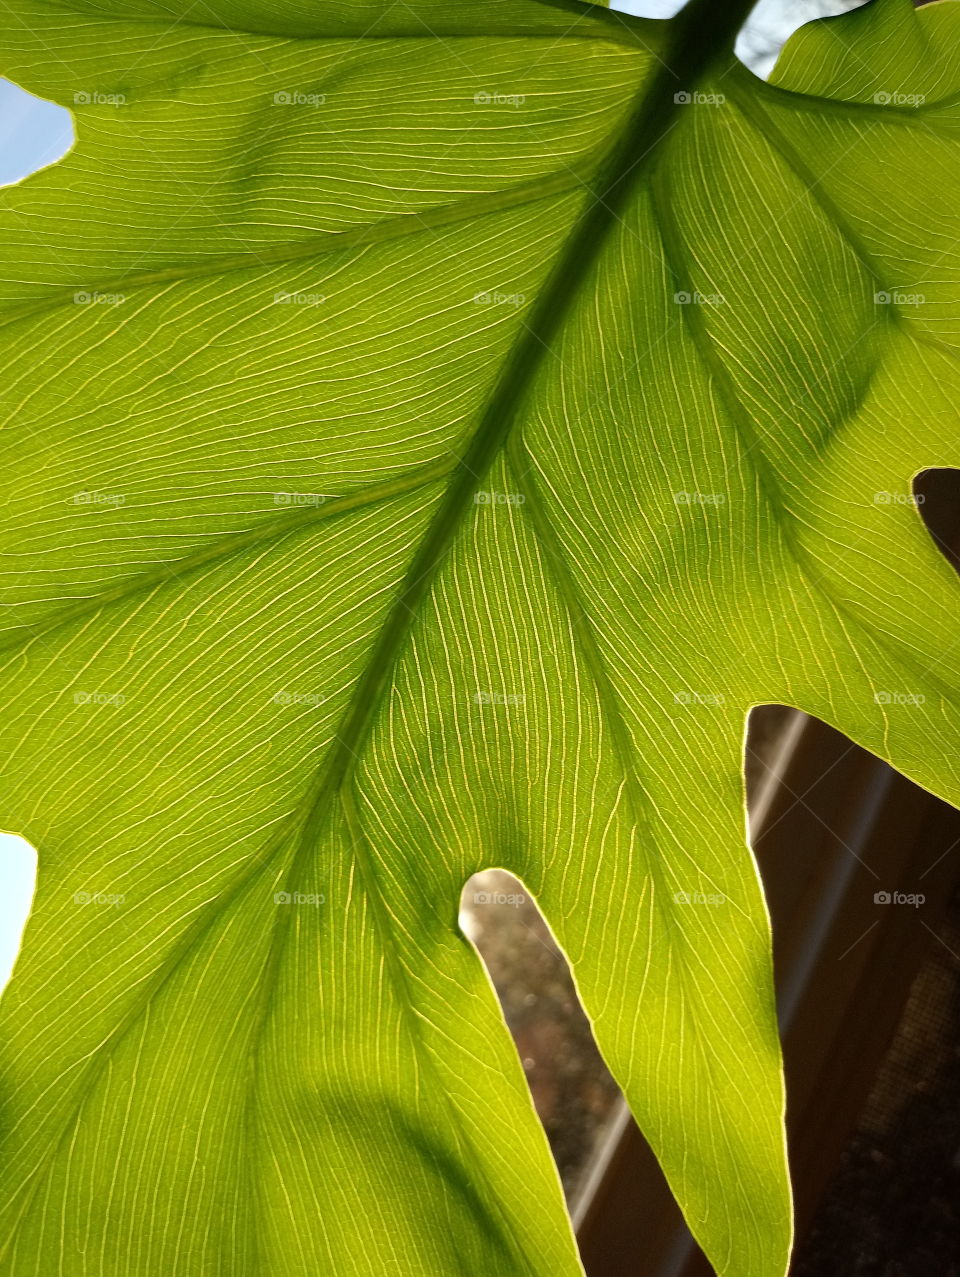 close up philodendron green leaf showing light and veins through leaf